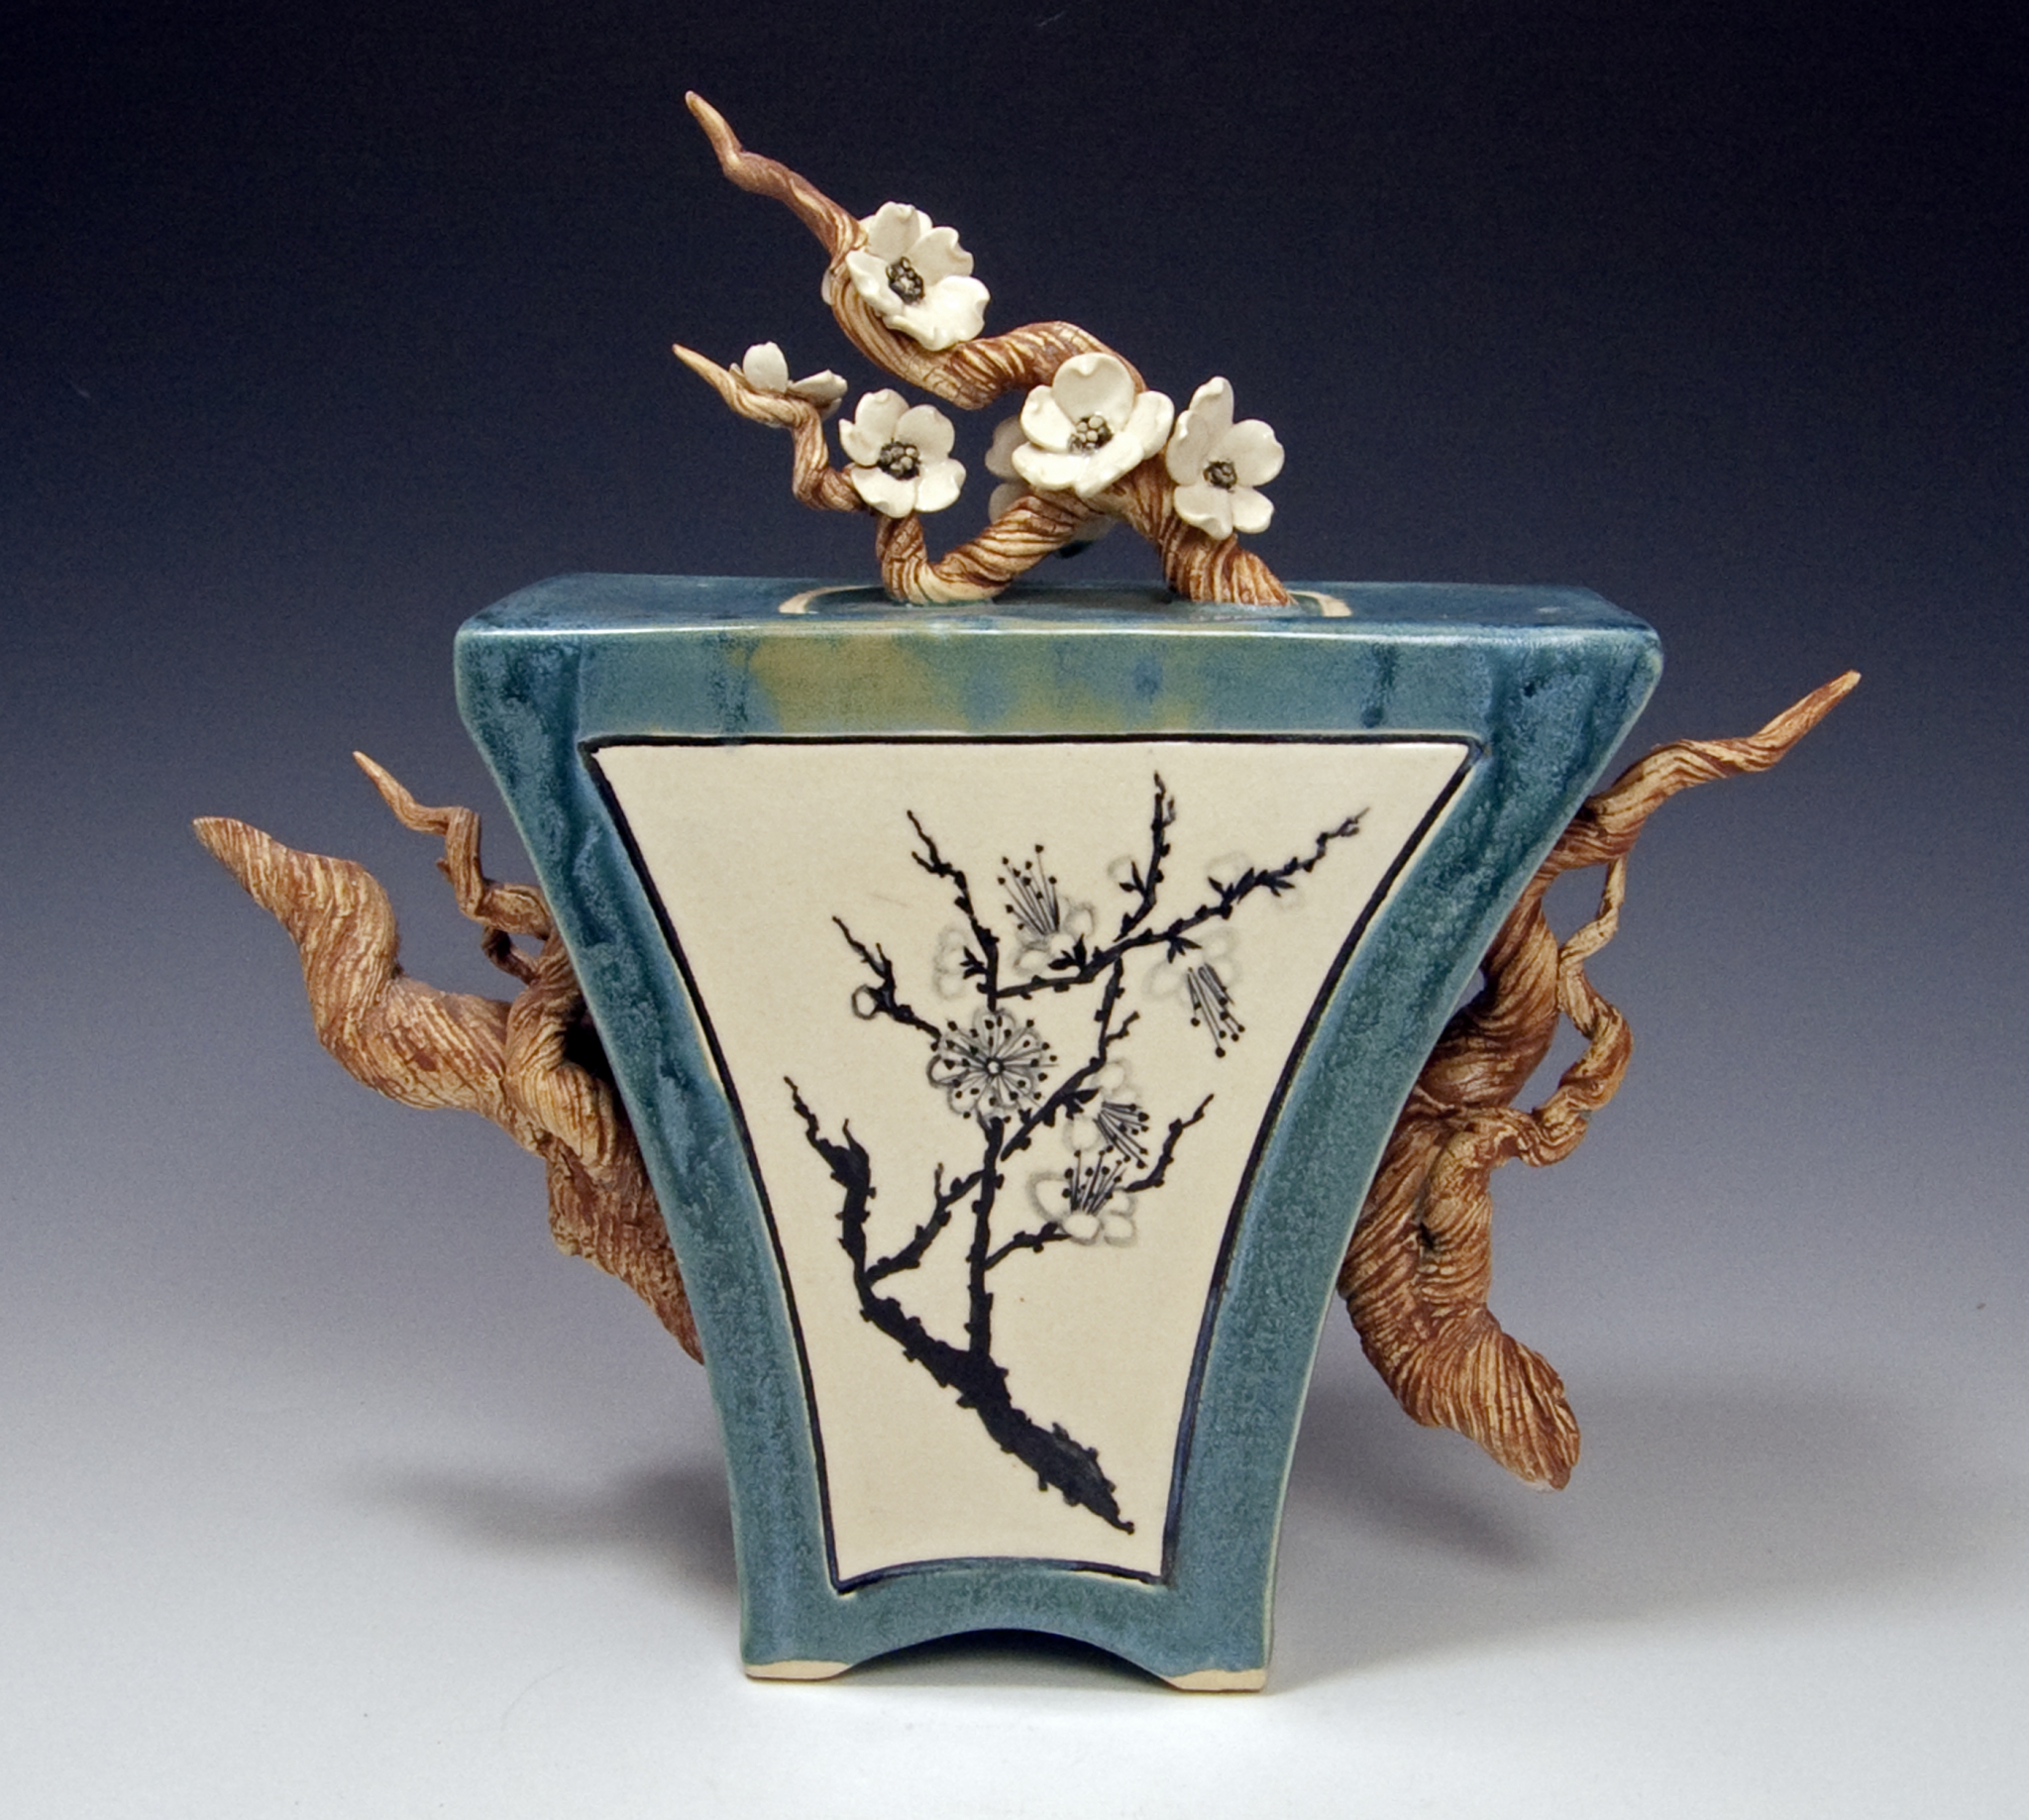 Click here to view Plum Blossom Box Teapot by Bonnie Belt